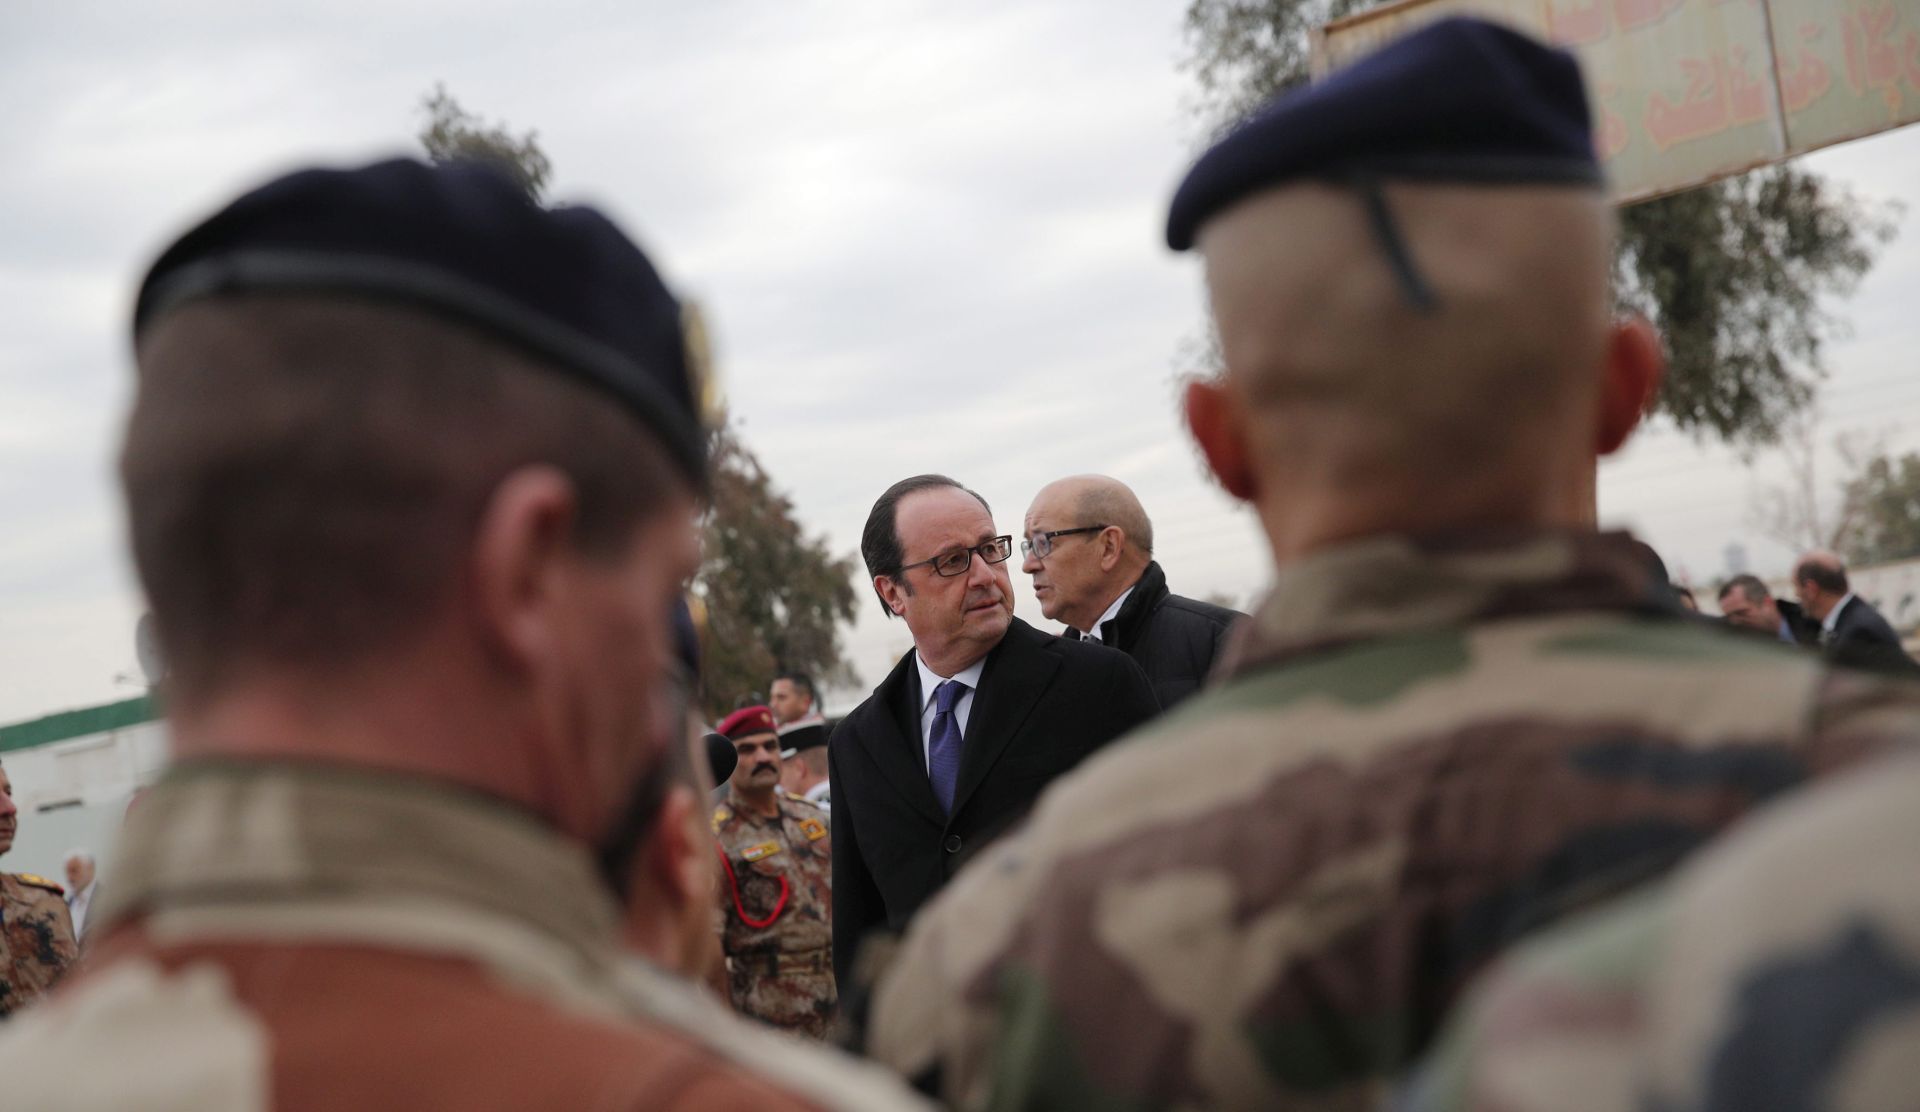 epa05694856 French President Francois Hollande (C) accompanied by French defense minister Jean-Yves Le Drian (back) inspects a group of French soldiers at the Iraqi Counter Terrorism Service Academy on the Baghdad Airport Complex in Baghdad, Iraq, 02 January 2017. Hollande is in Iraq on a one-day visit. The soldiers are part of a task force to assess and advise Iraqi security forces under the command of international military instructors.  EPA/CHRISTOPHE ENA / POOL MAXPPP OUT